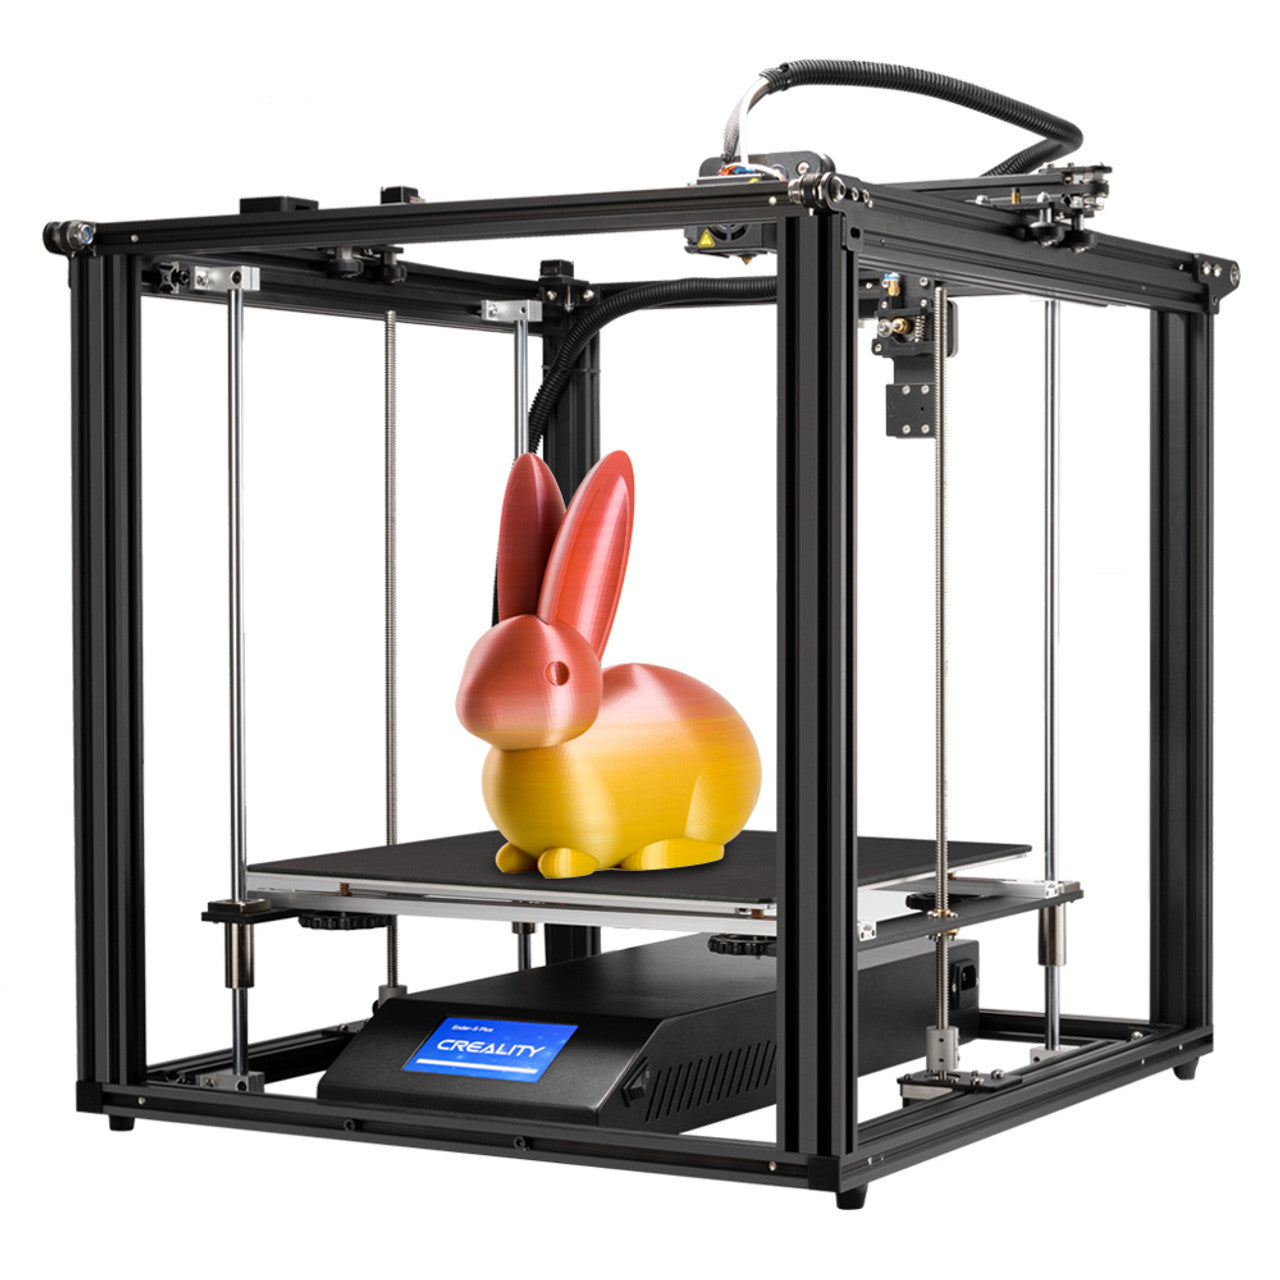 3D Printer Buyer's Guide: 10 Things to Know